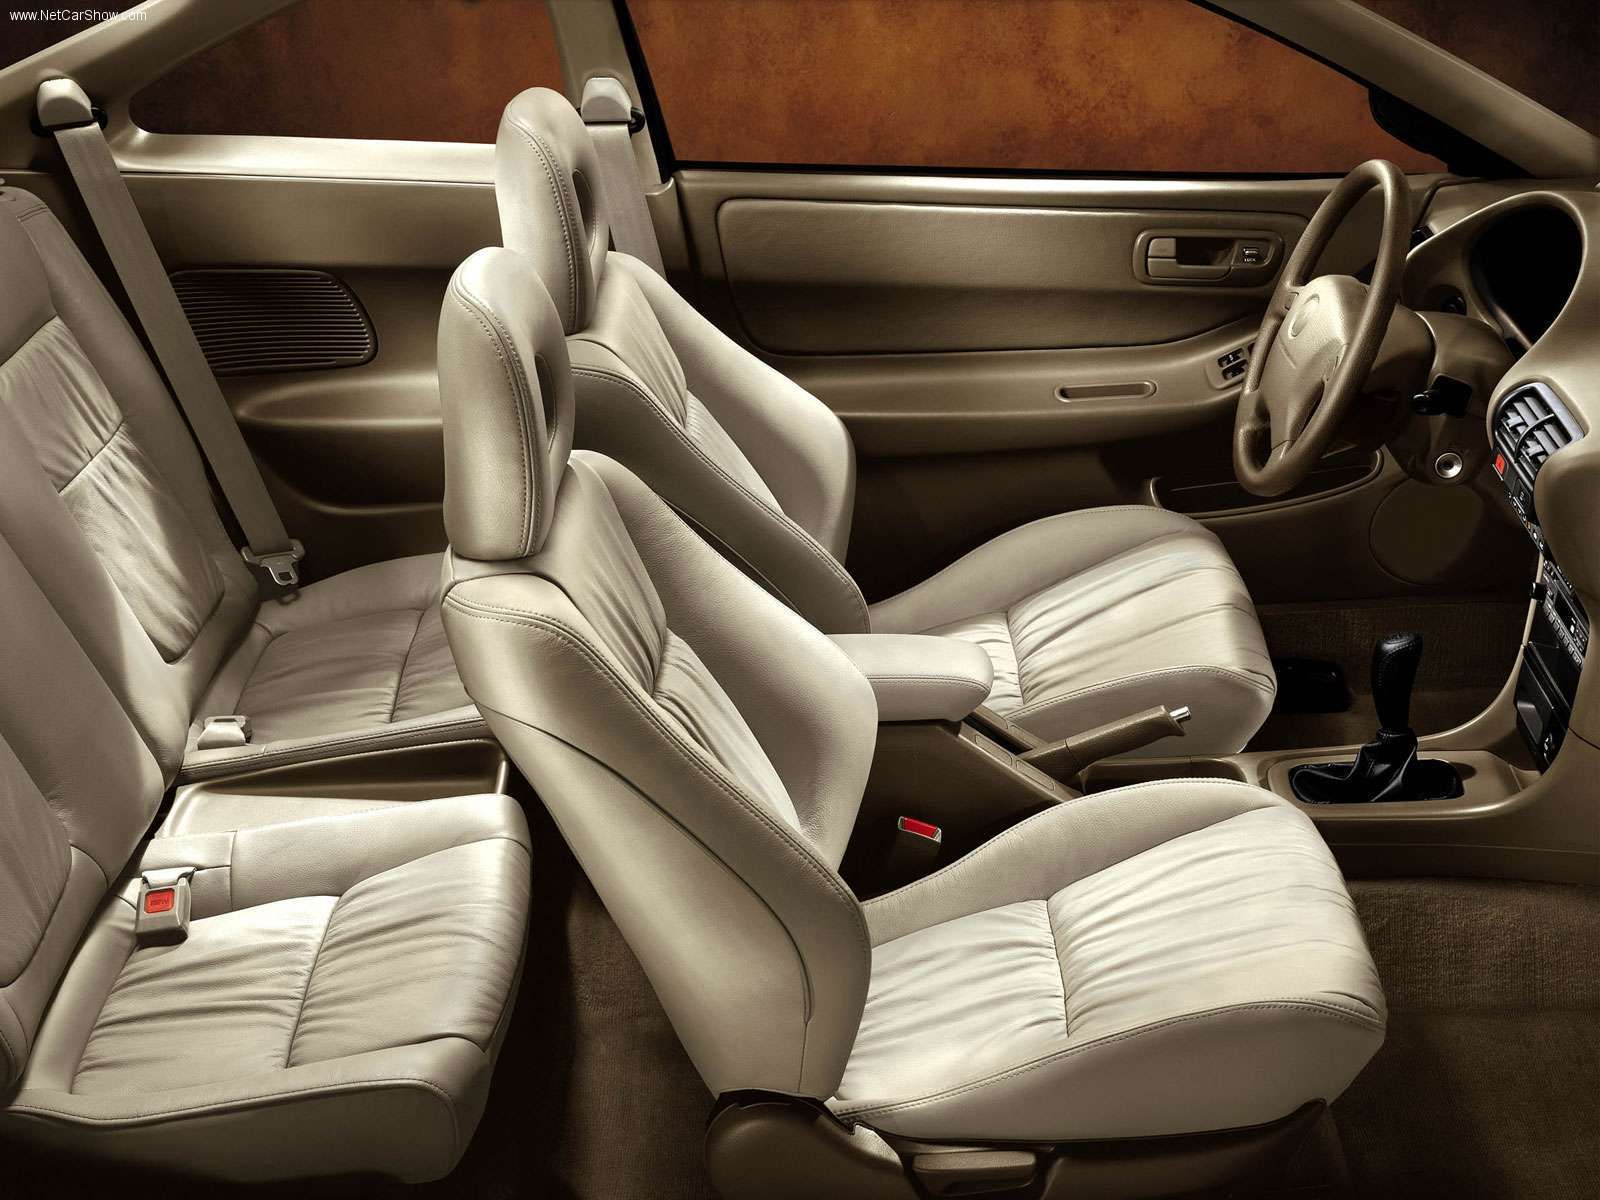 Acura Integra cabin, beige, view from side 